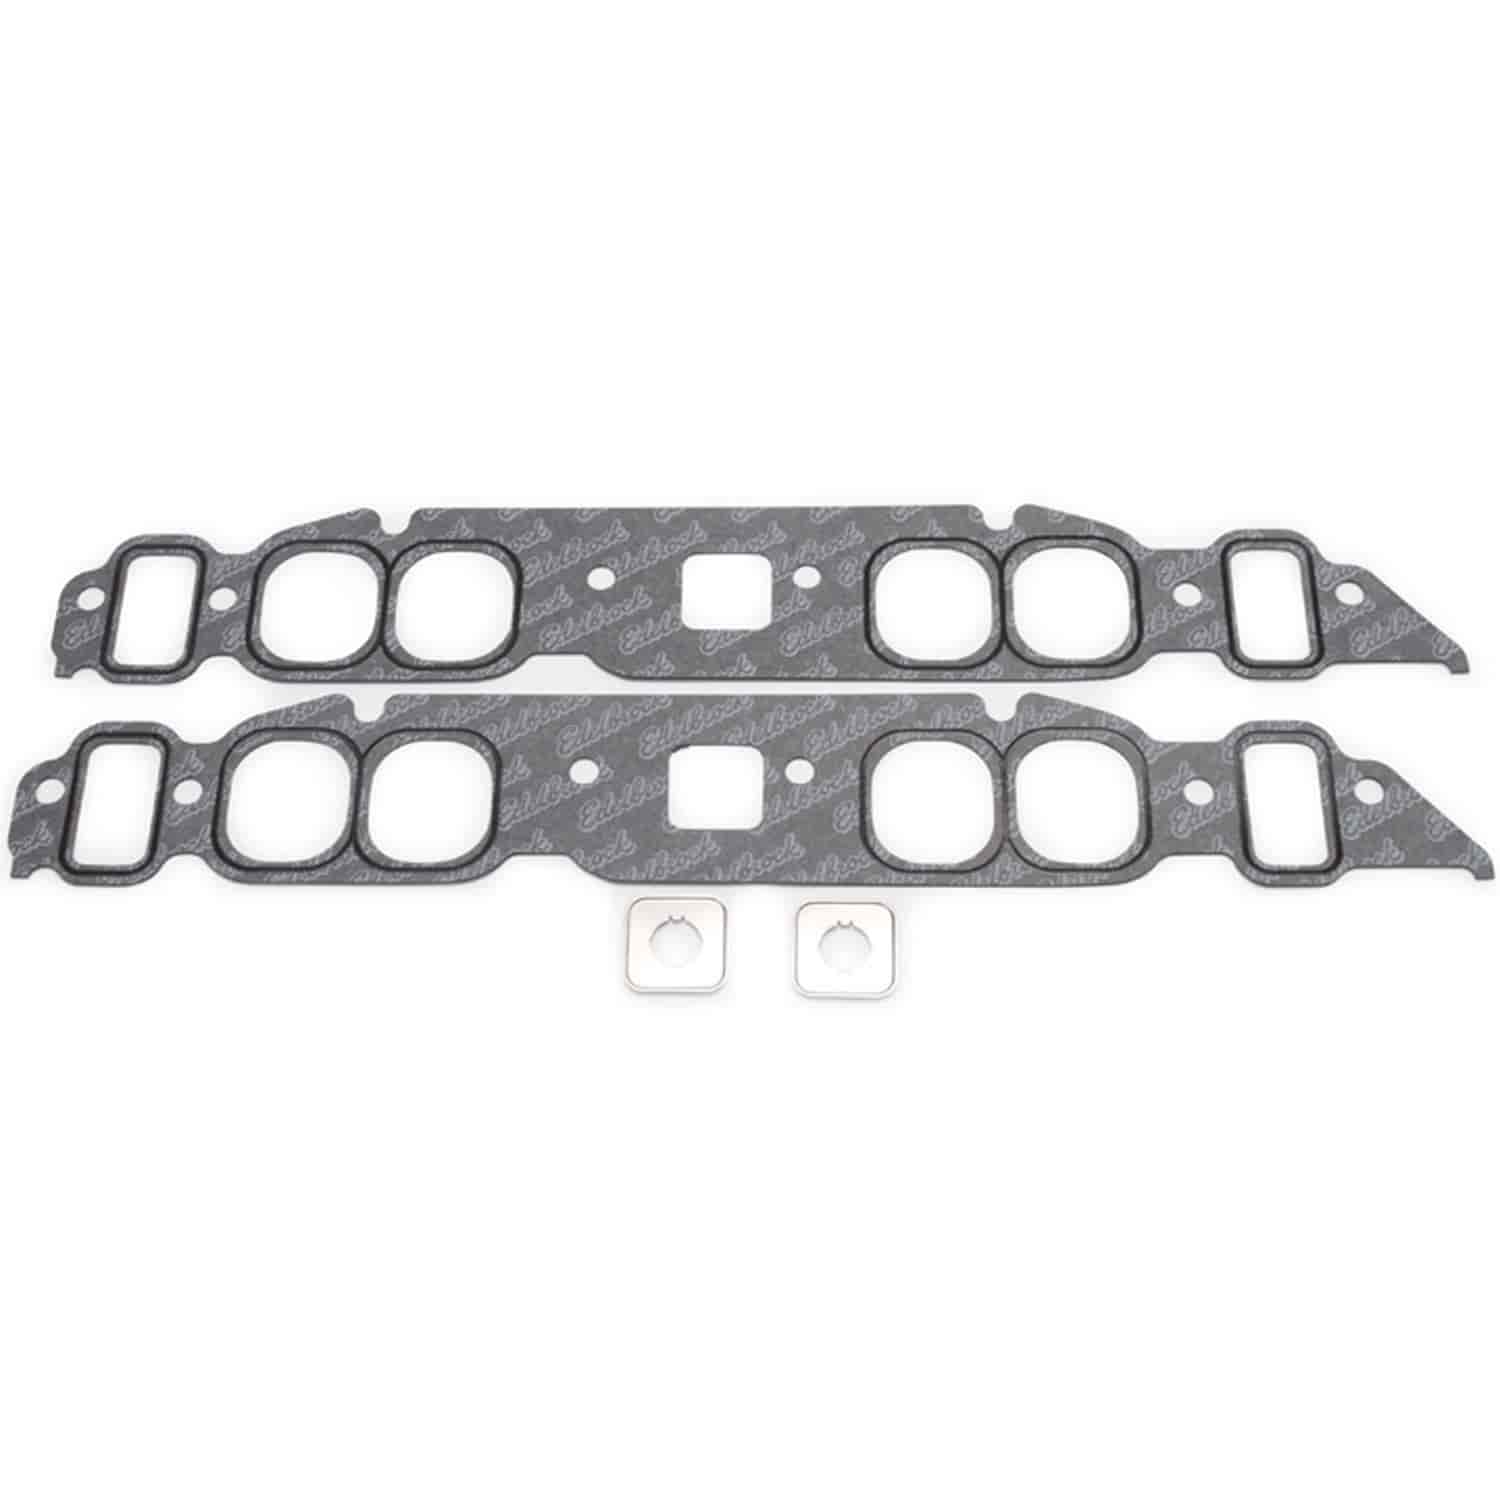 Intake Gaskets for Oval Port Big Block Chevy 396-454